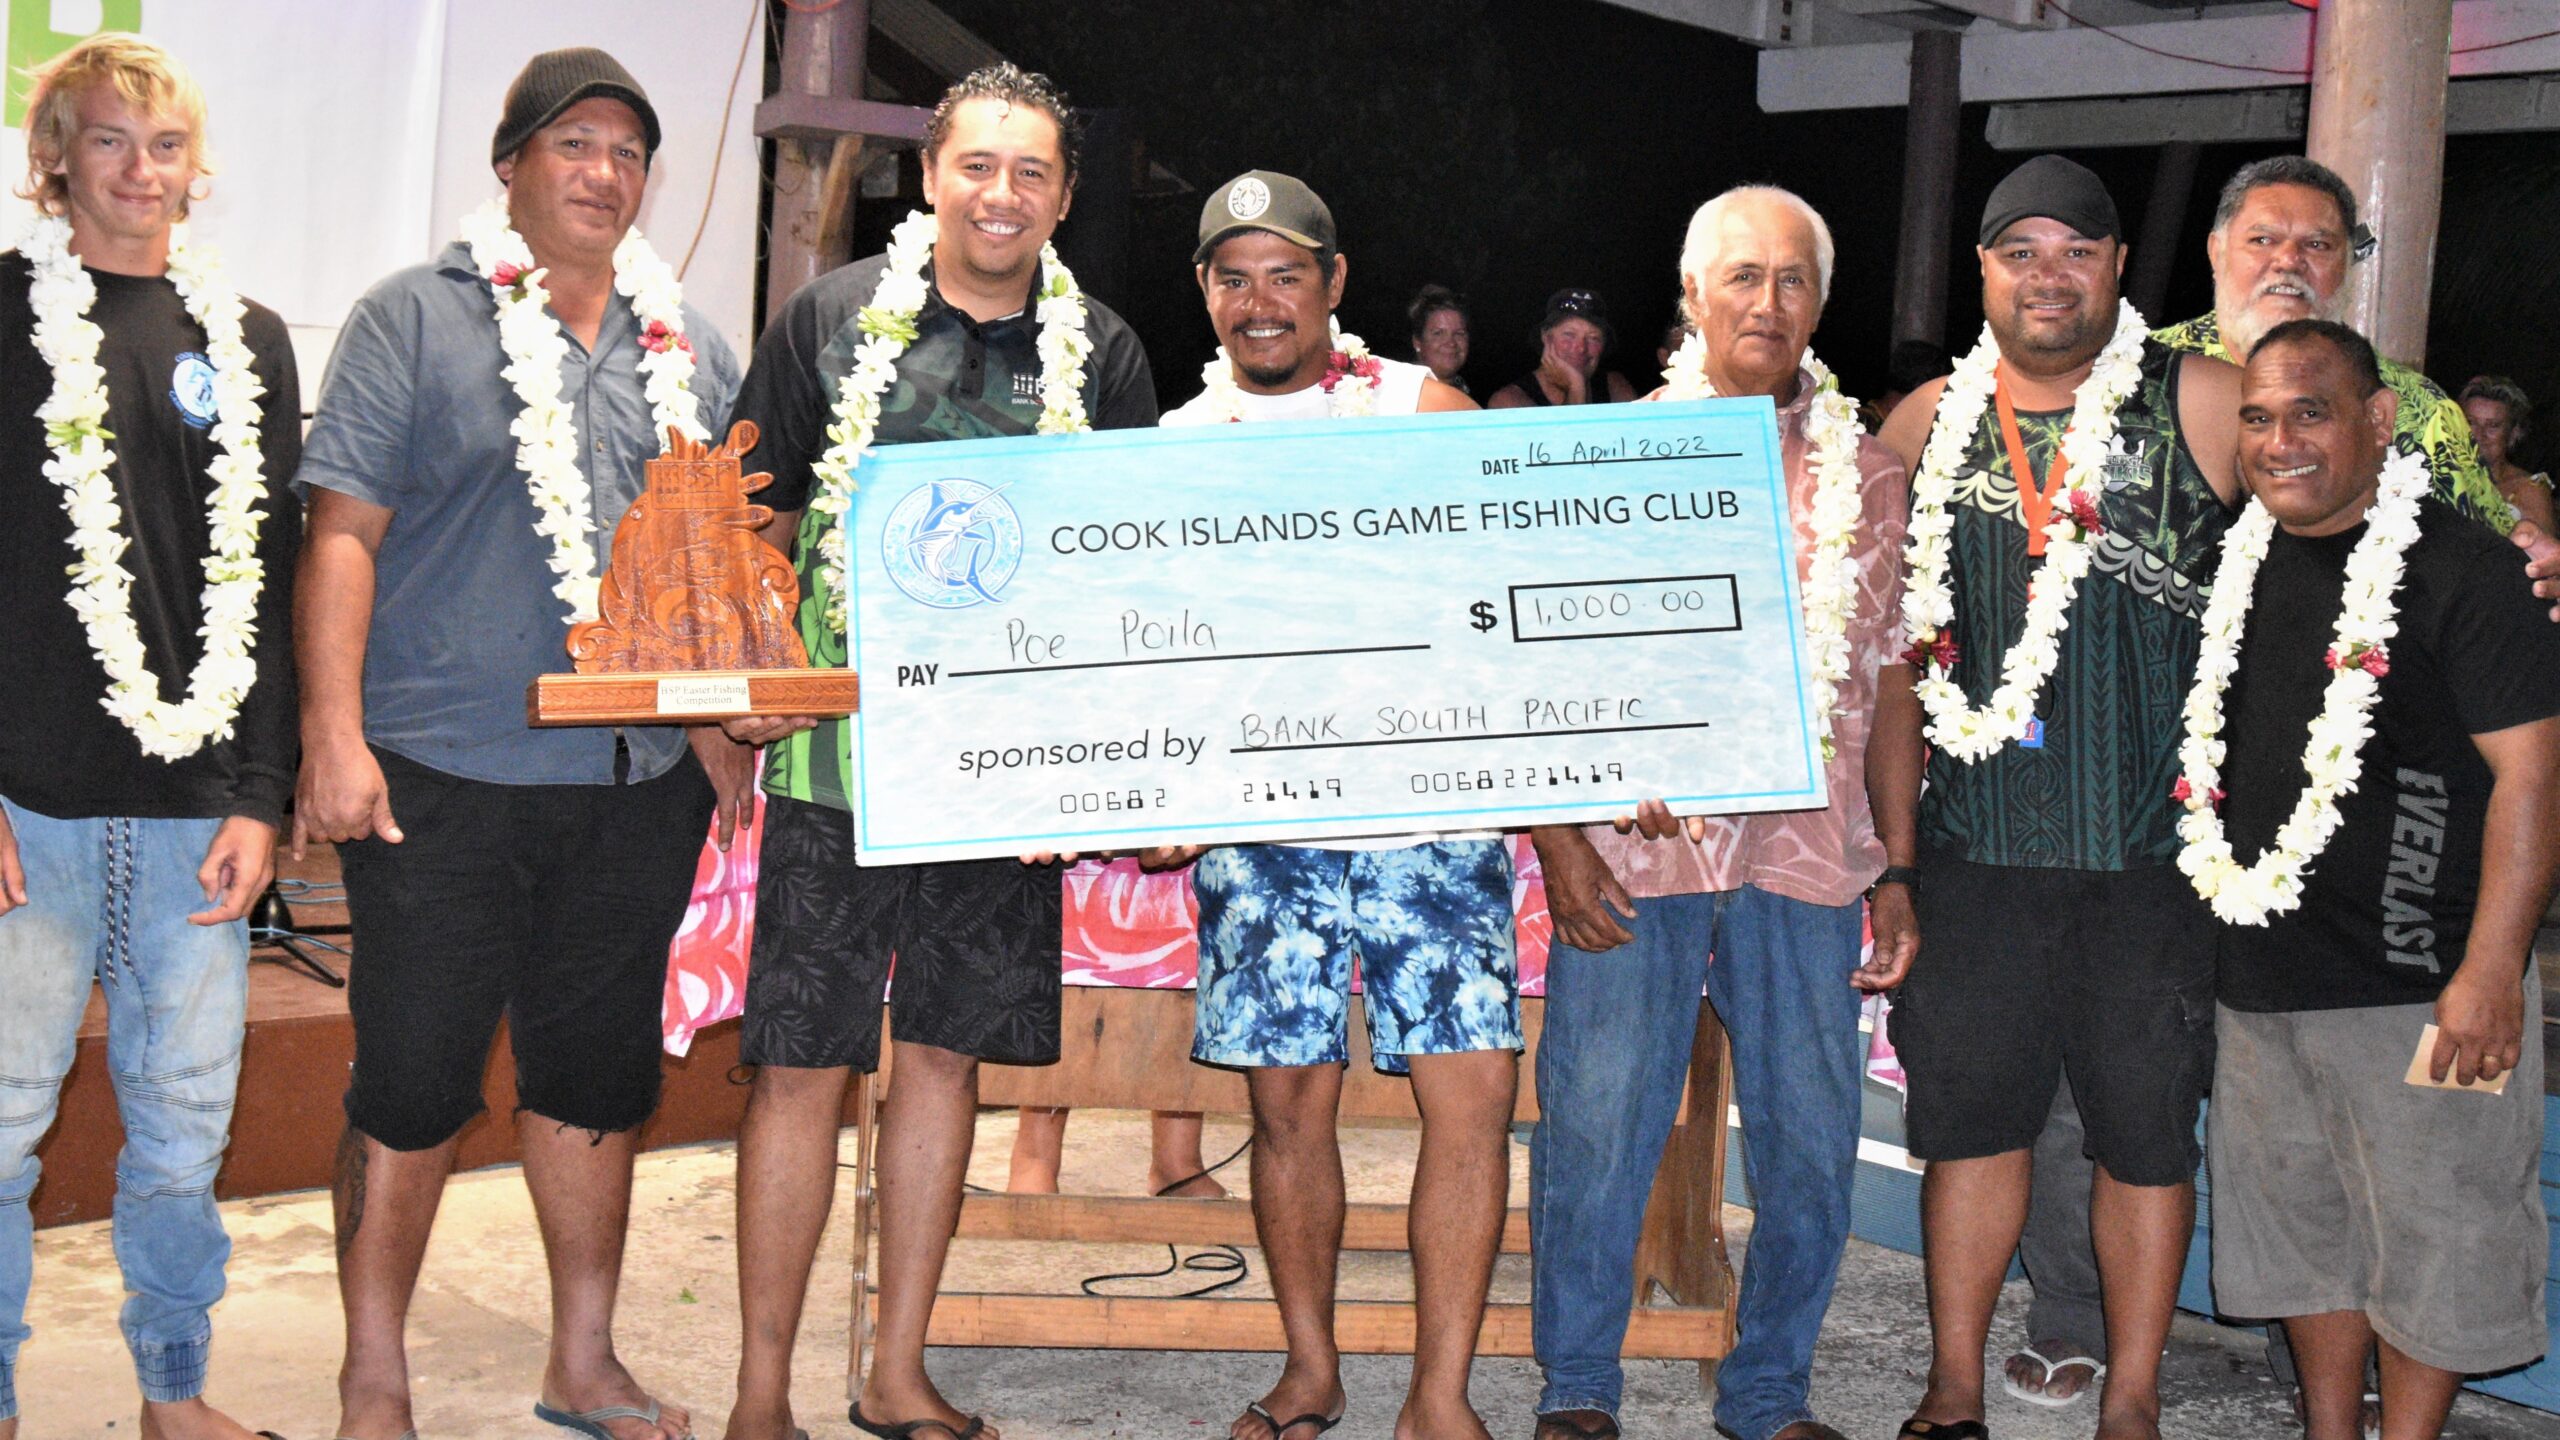 Poila wins fishing comp, scrapes by with 100 grams